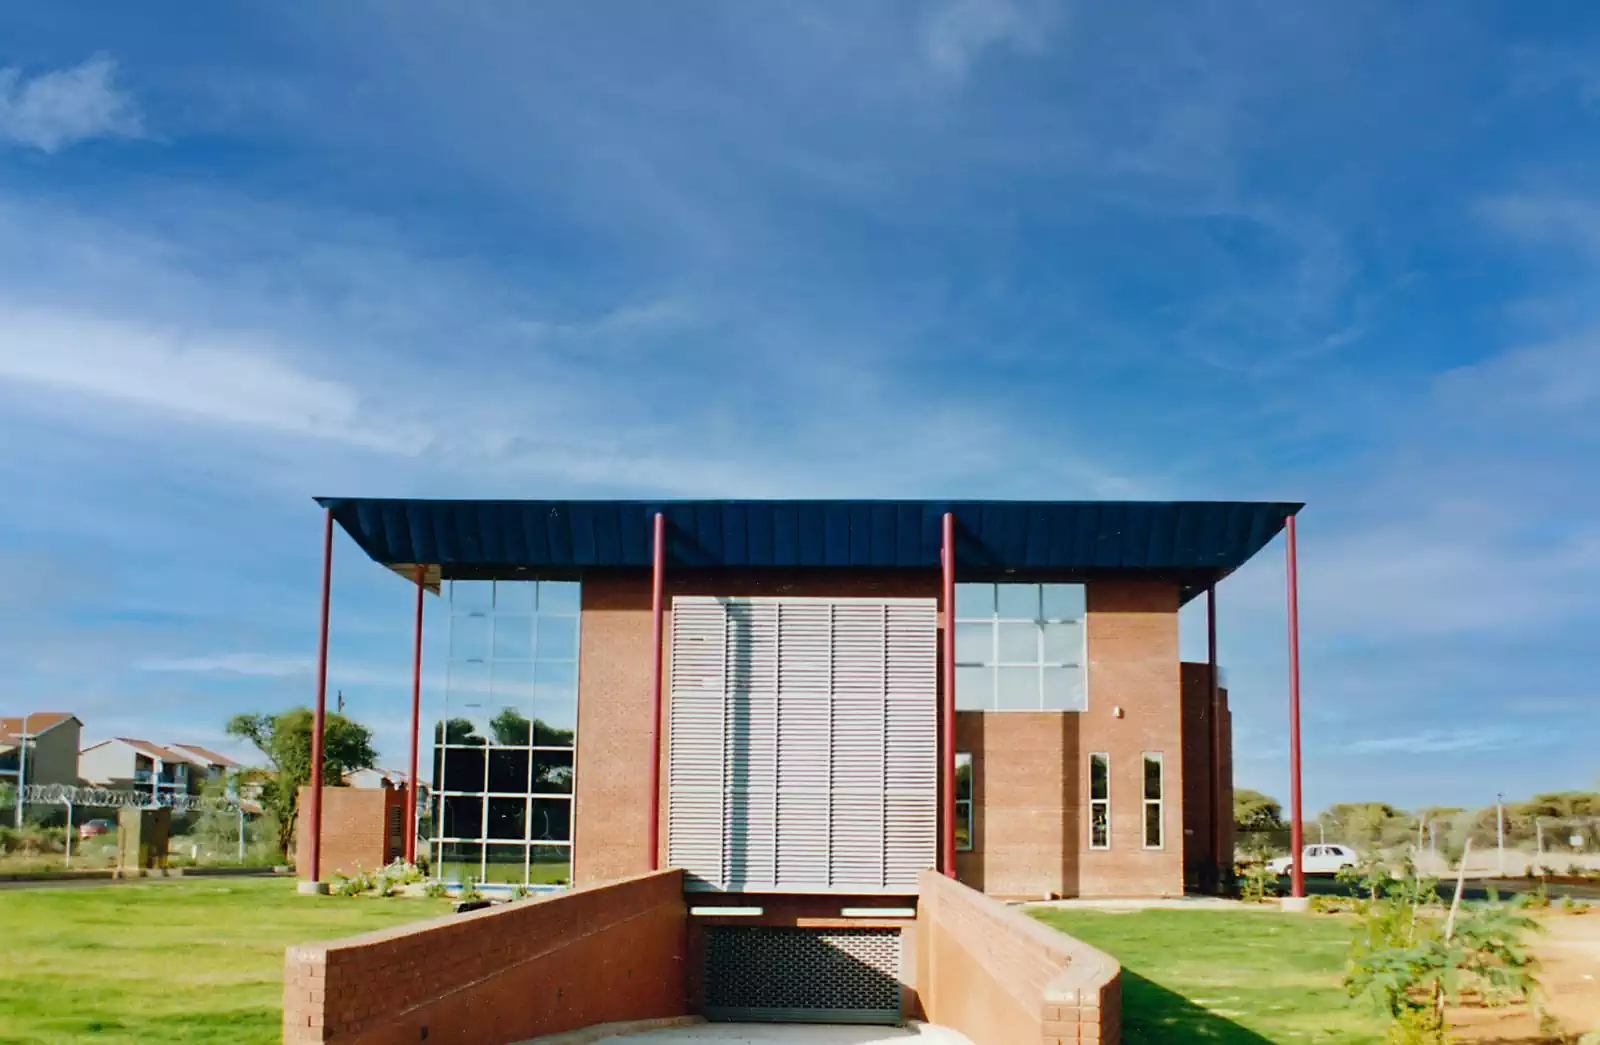 Modern facebrick and glass minimalist office building designed by architect in Gaborone Botswana